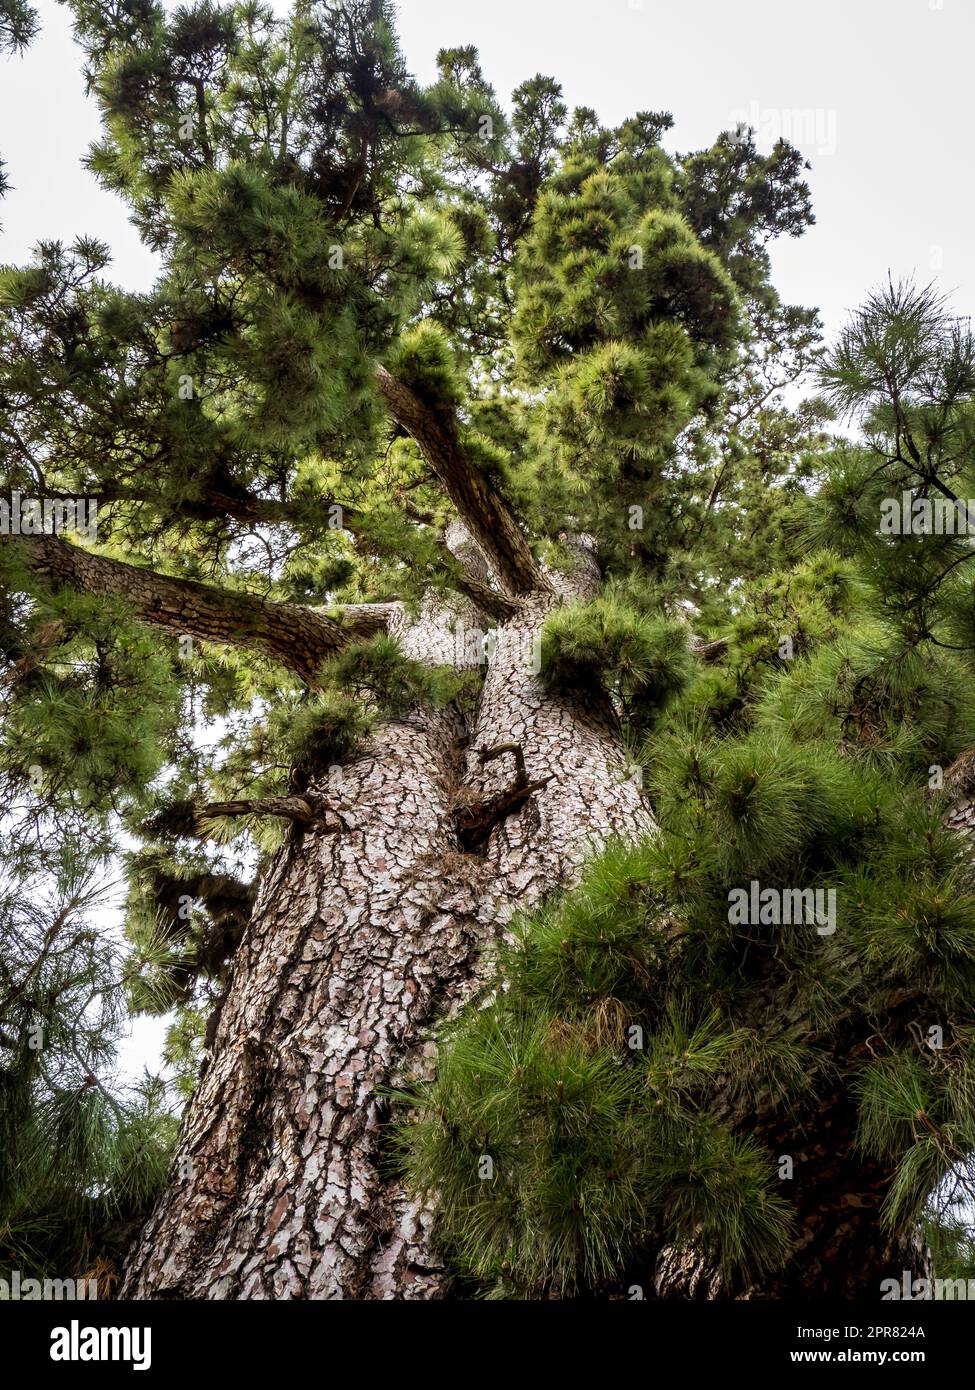 Unique perspective on the extraordinary Pino Gordo (Pinus Canariensis) with a portrait from below, showcasing its gigantic size and thick trunk. Stock Photo